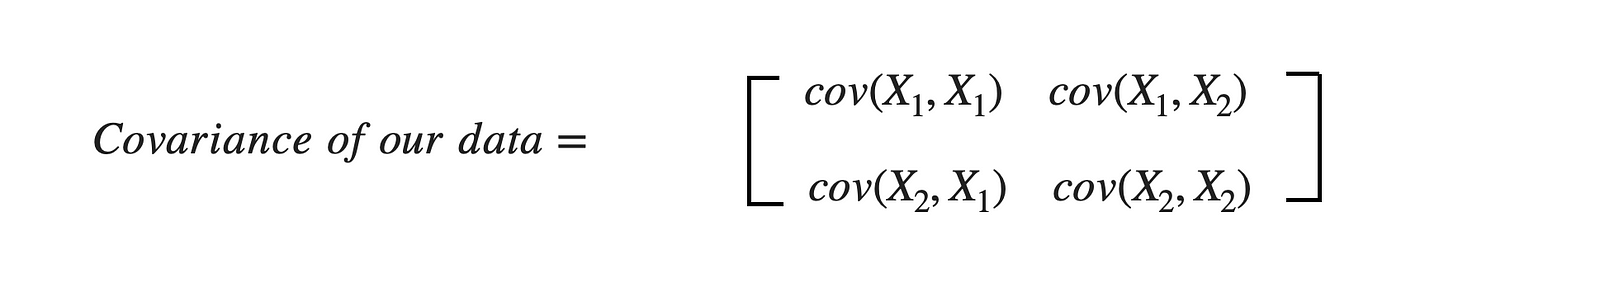 Covariance of two variables